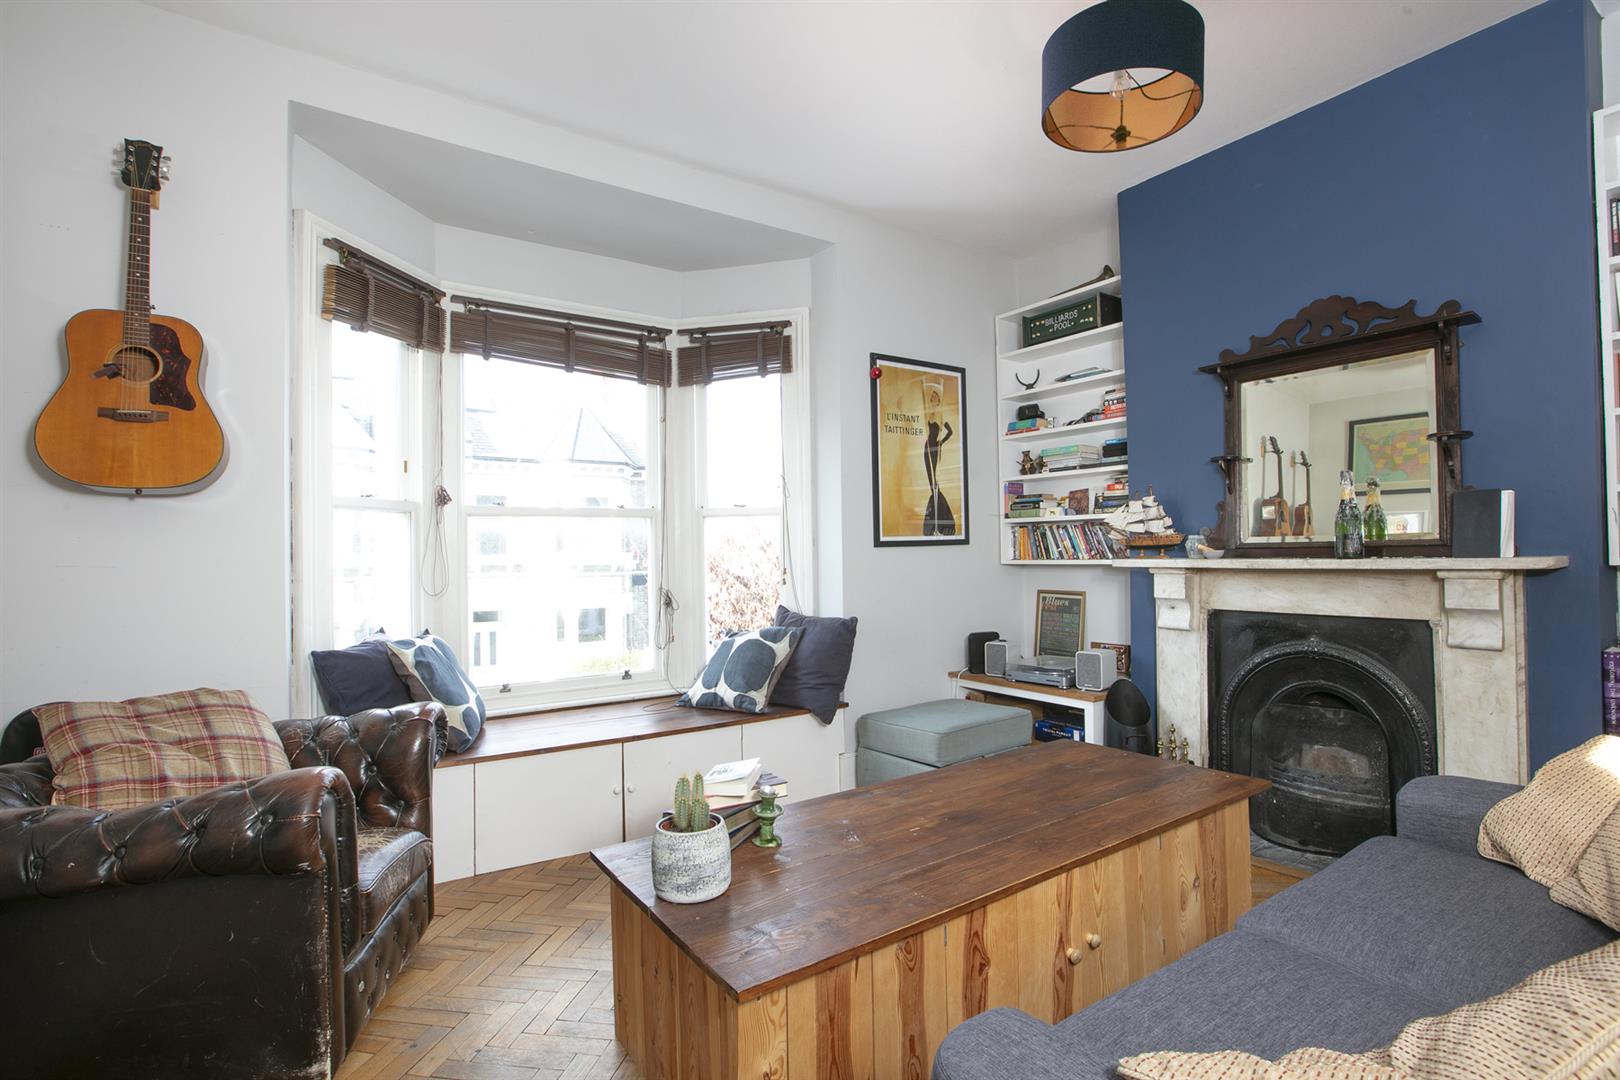 Flat - Conversion For Sale in Shenley Road, London, SE5 782 view2